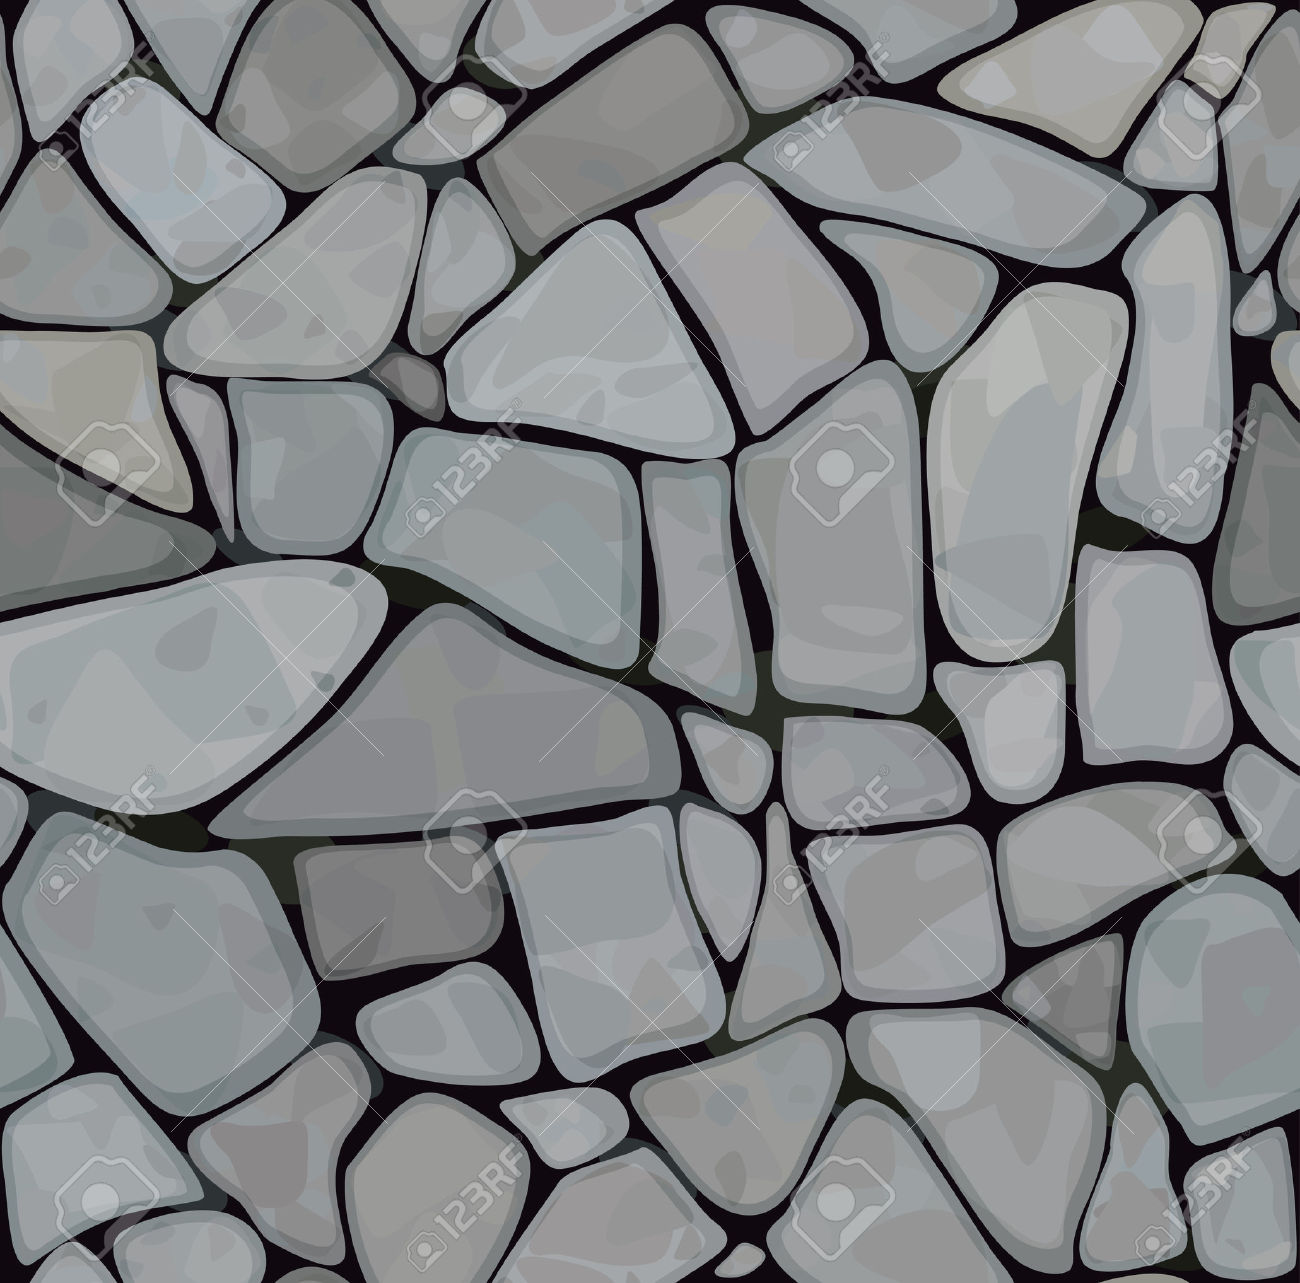 Stone wall texture clipart - Clipground